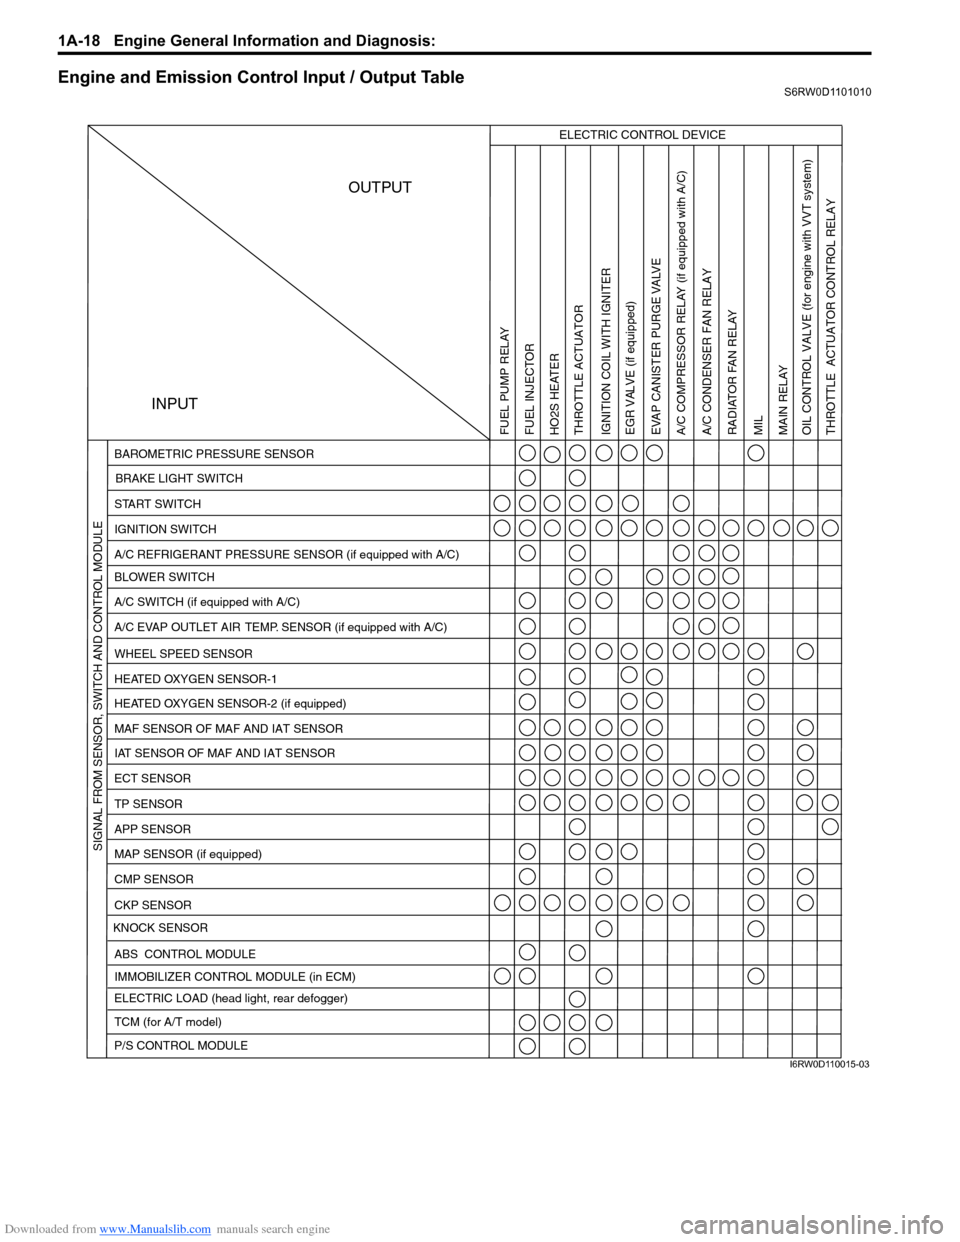 SUZUKI SX4 2006 1.G Service Repair Manual Downloaded from www.Manualslib.com manuals search engine 1A-18 Engine General Information and Diagnosis: 
Engine and Emission Control Input / Output TableS6RW0D1101010
INPUTOUTPUT
ELECTRIC CONTROL DEV